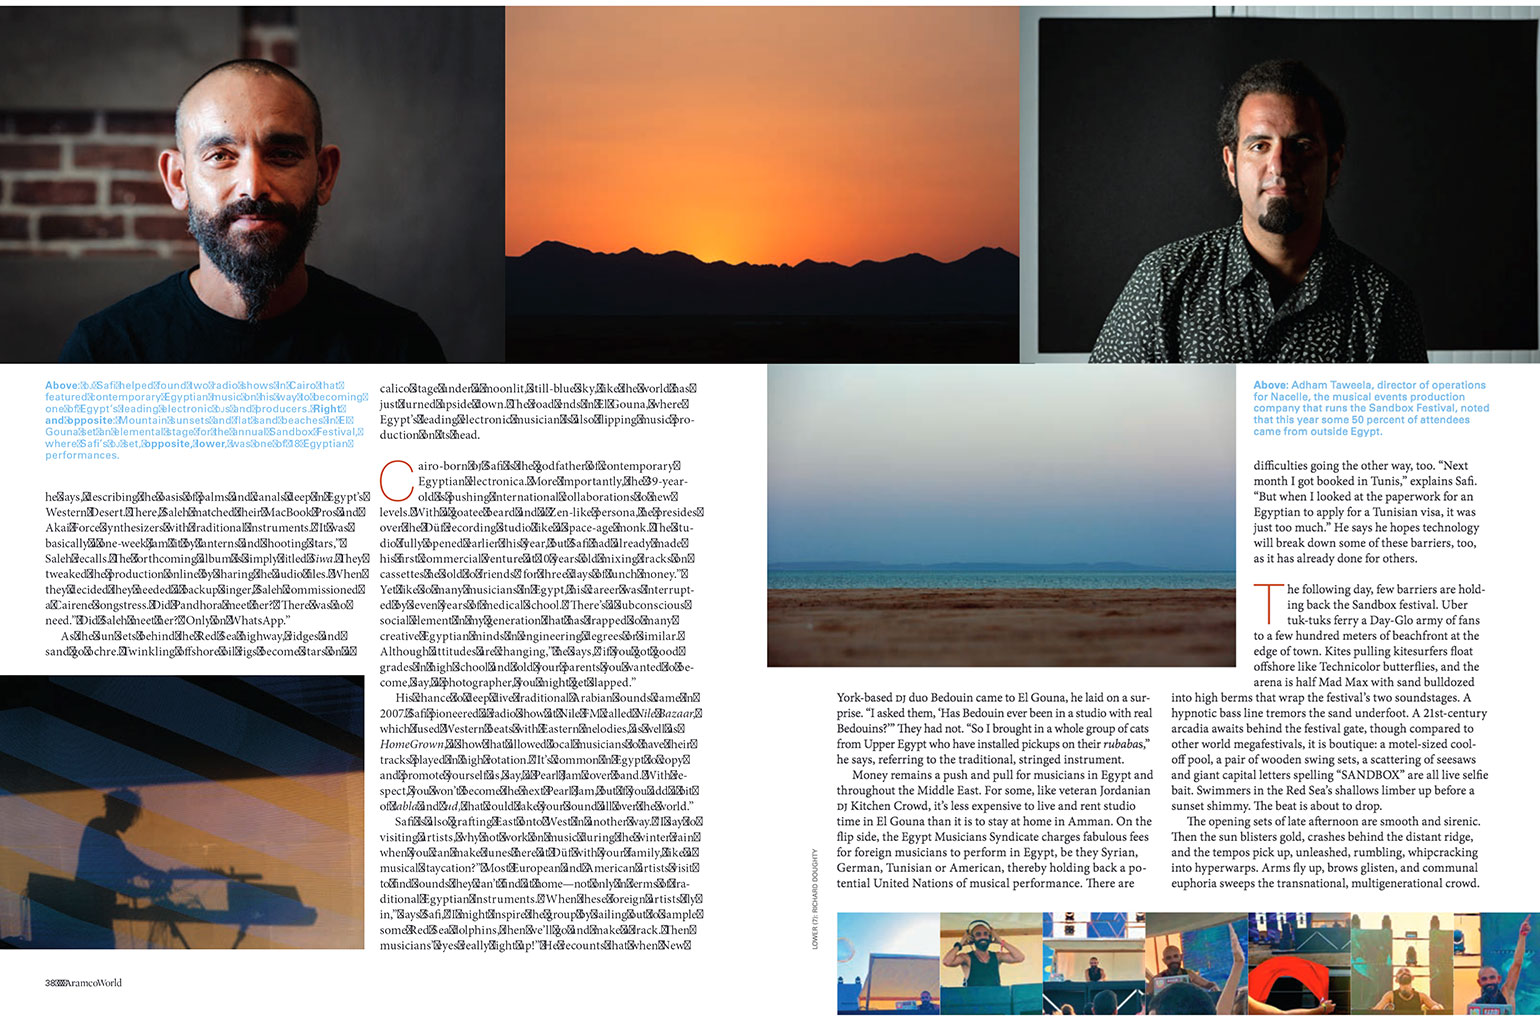 Double-page magazine spread showing text and several photographs, portaits and landscapes in Egypt